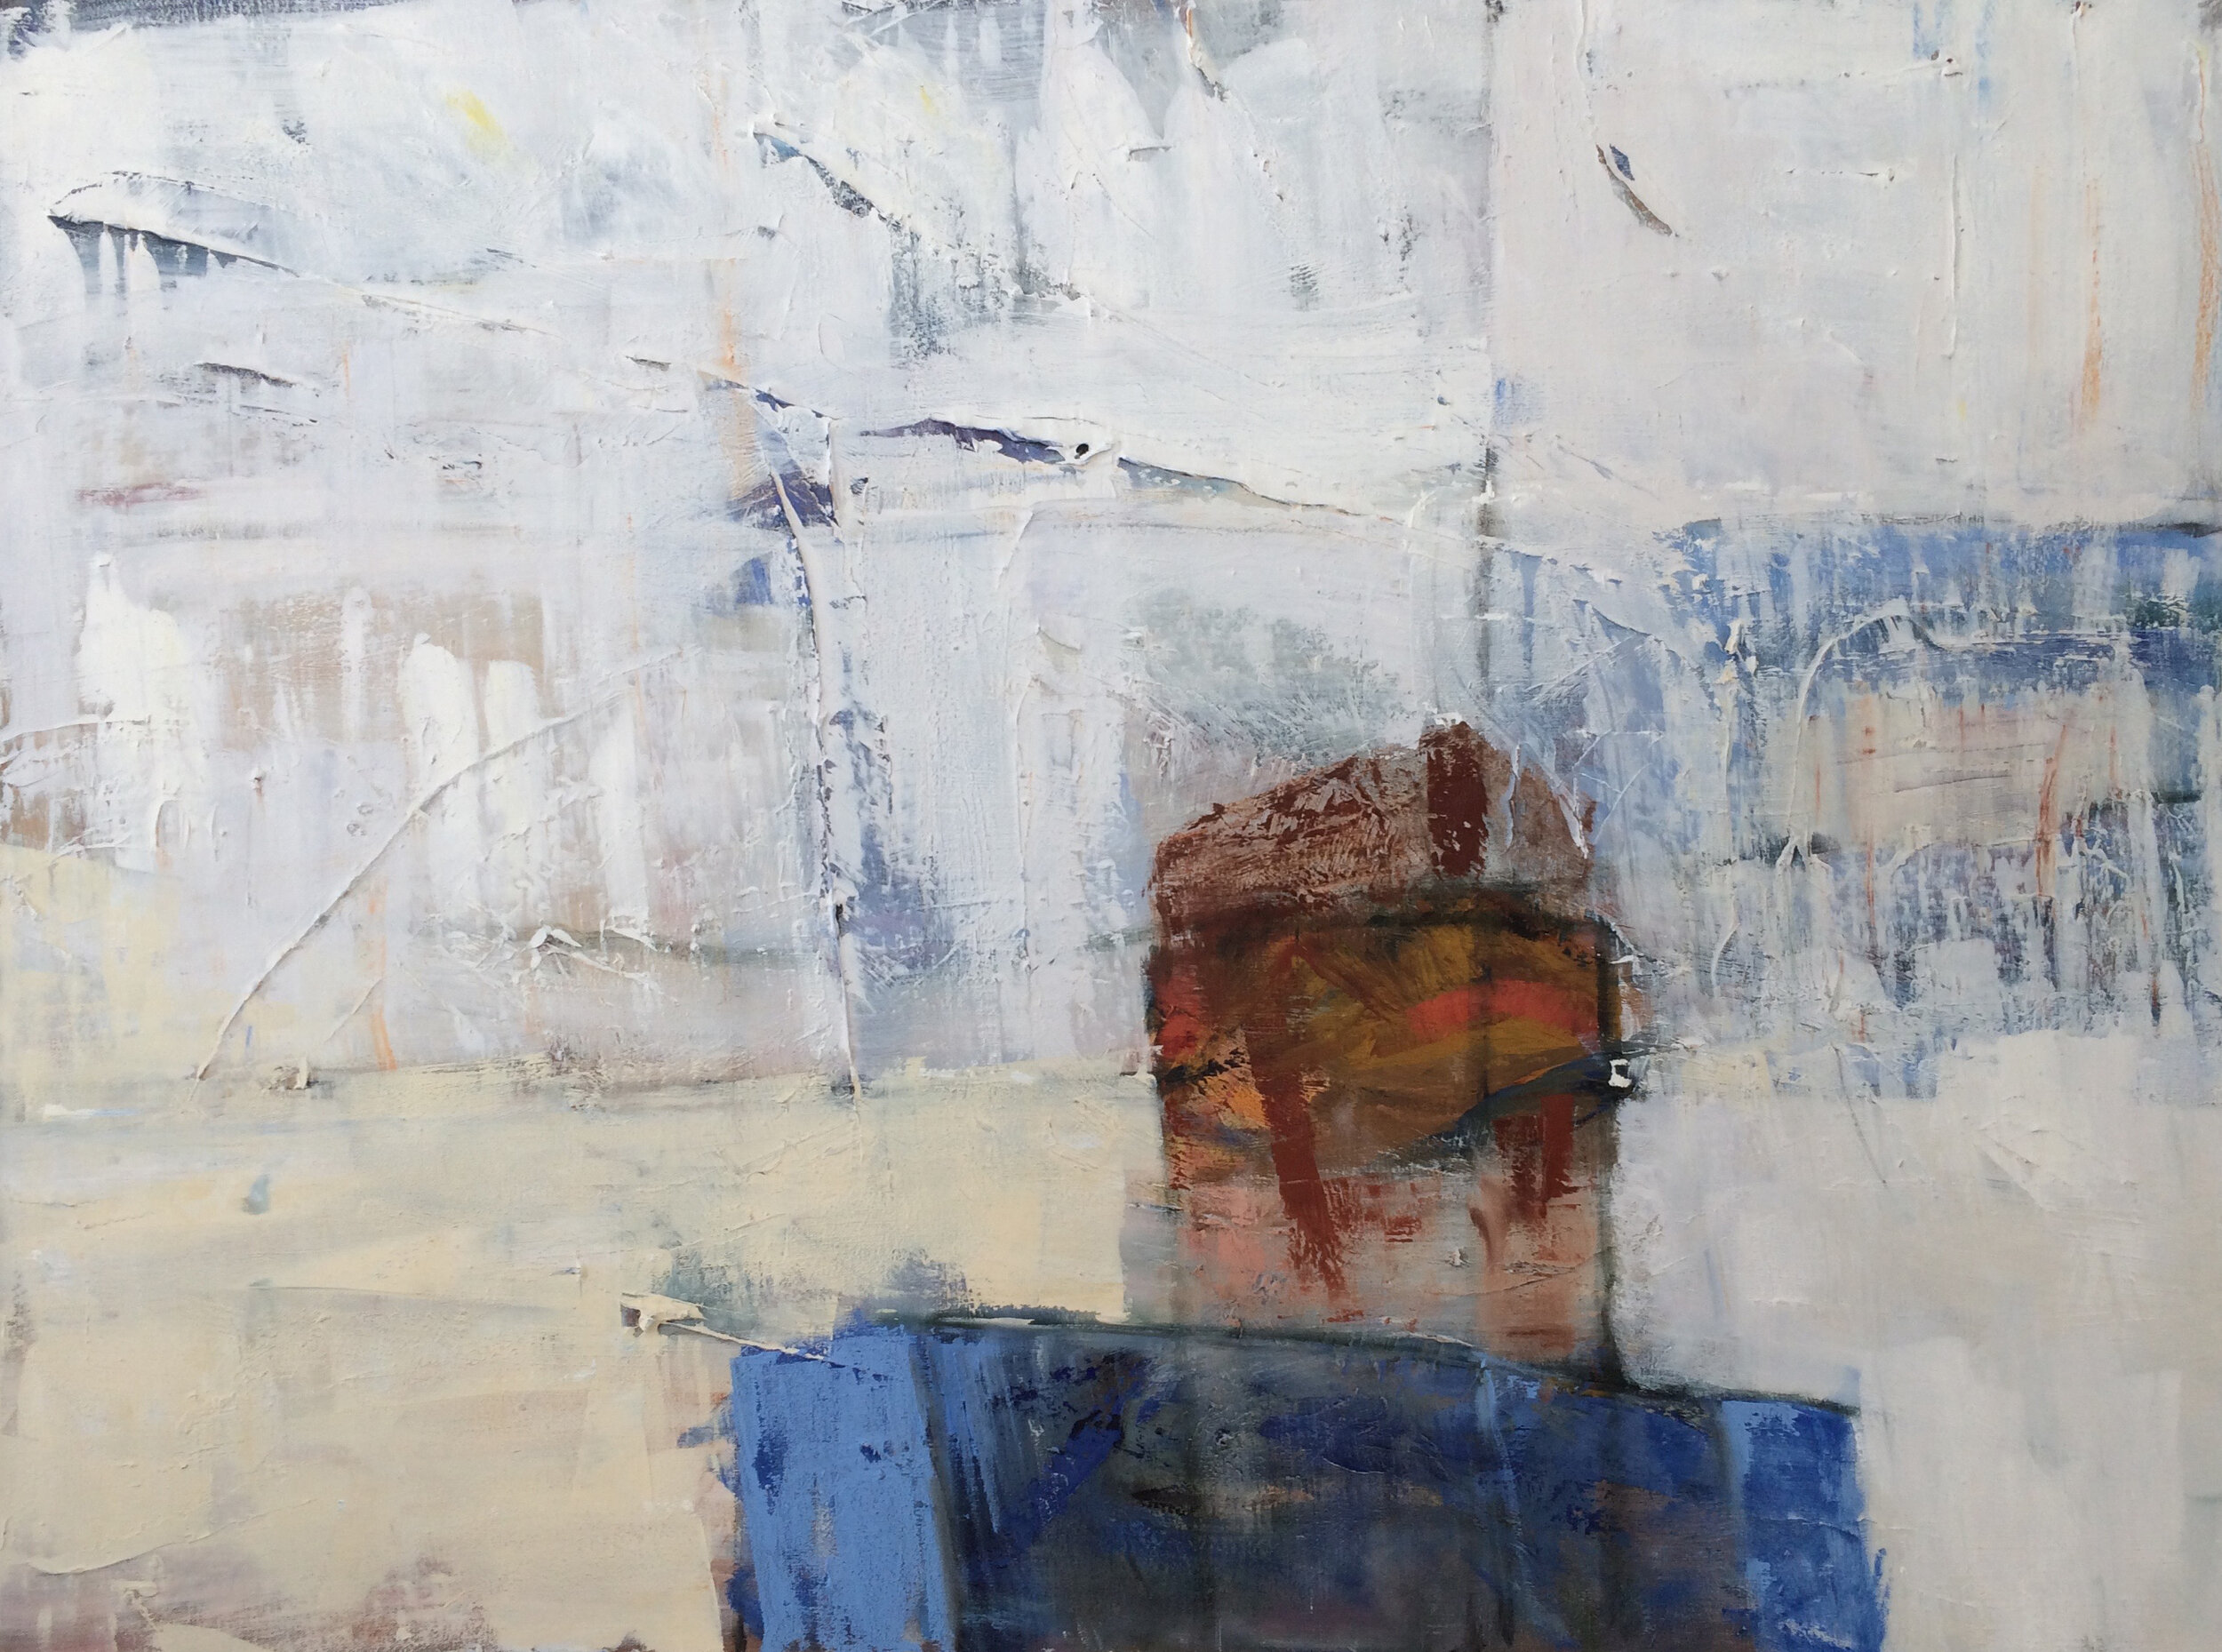   Betty Glick ,  Border Series 1: Watchtower , oil on canvas, 30x40 inches, $1,600 